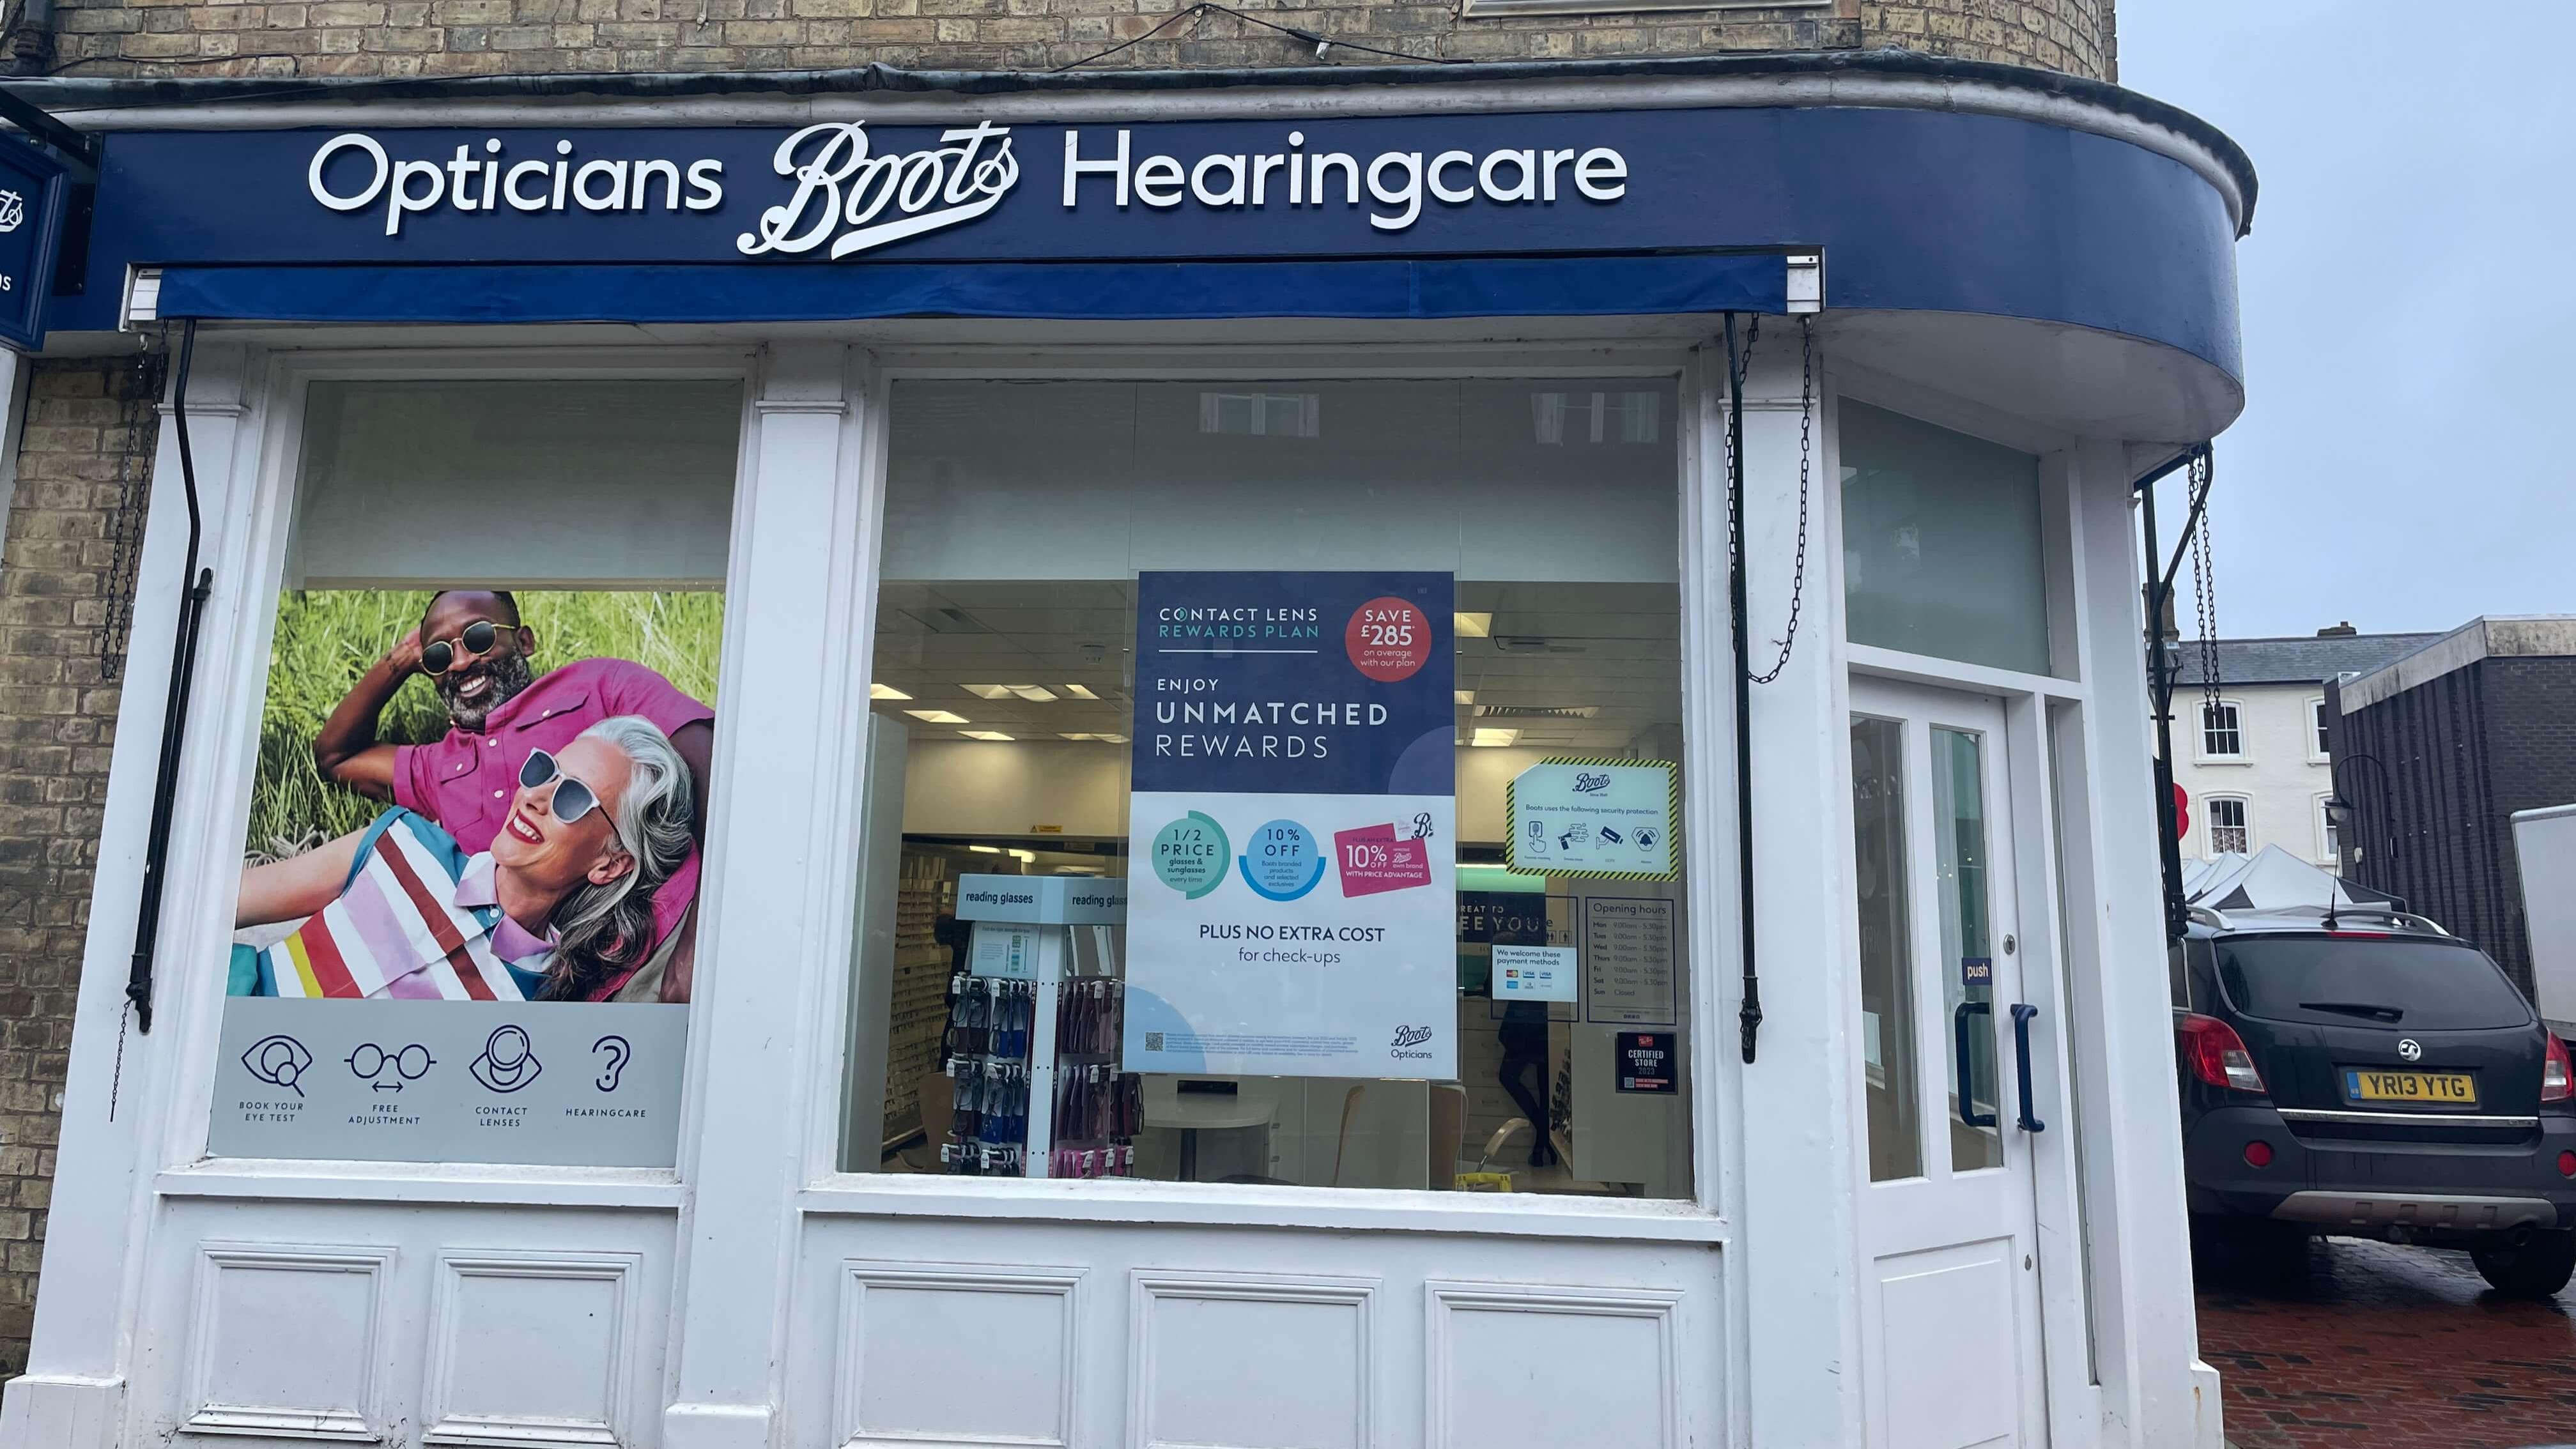 Boots Hearingcare Boots Hearingcare Ely Ely 03452 701600